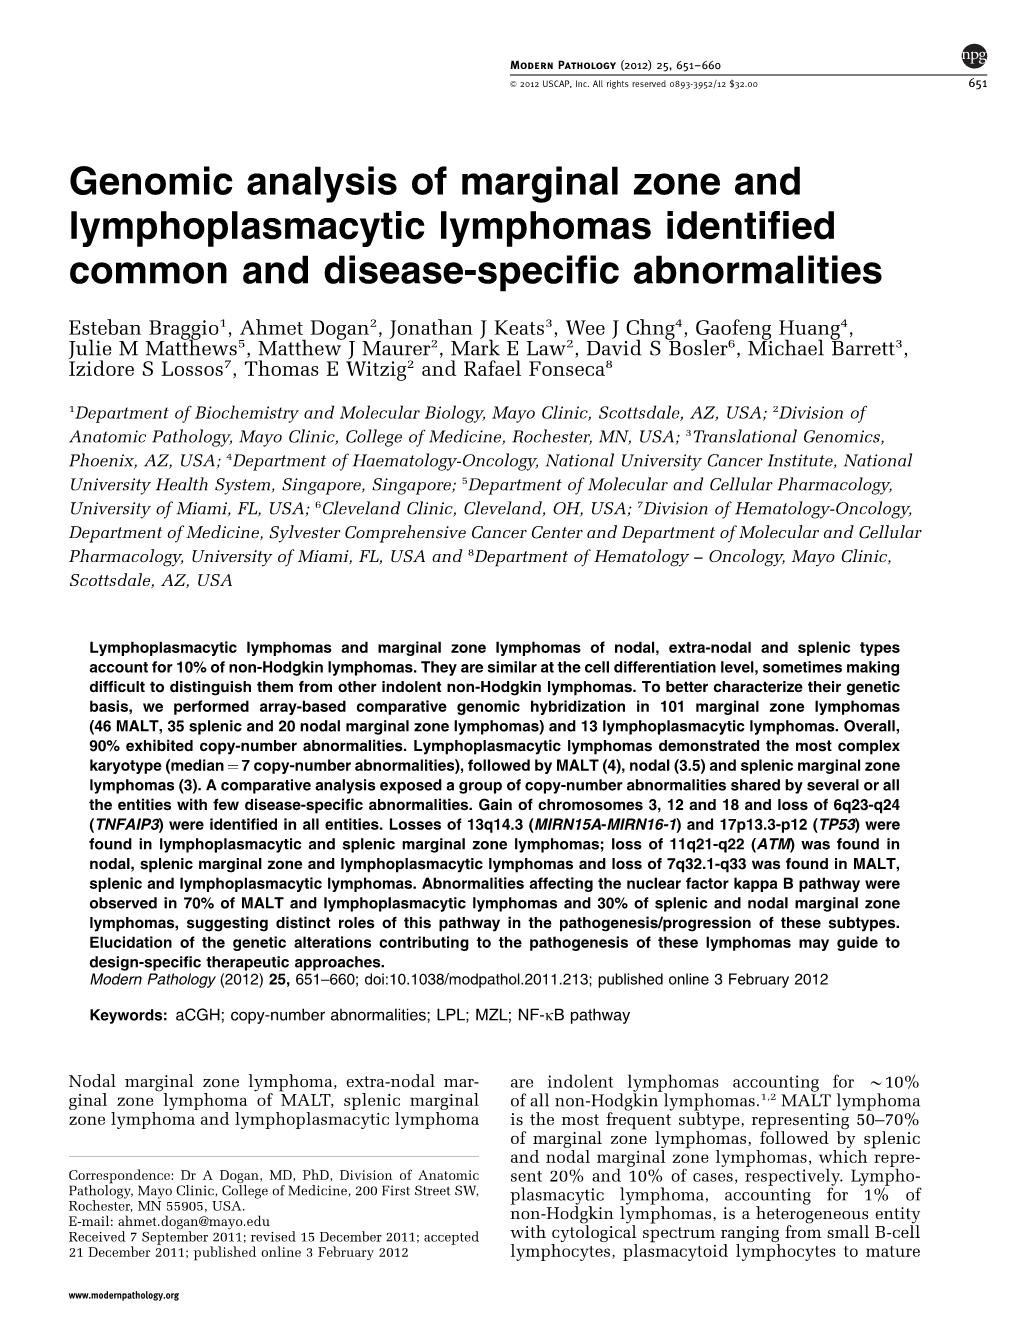 Genomic Analysis of Marginal Zone and Lymphoplasmacytic Lymphomas Identified Common and Disease-Specific Abnormalities